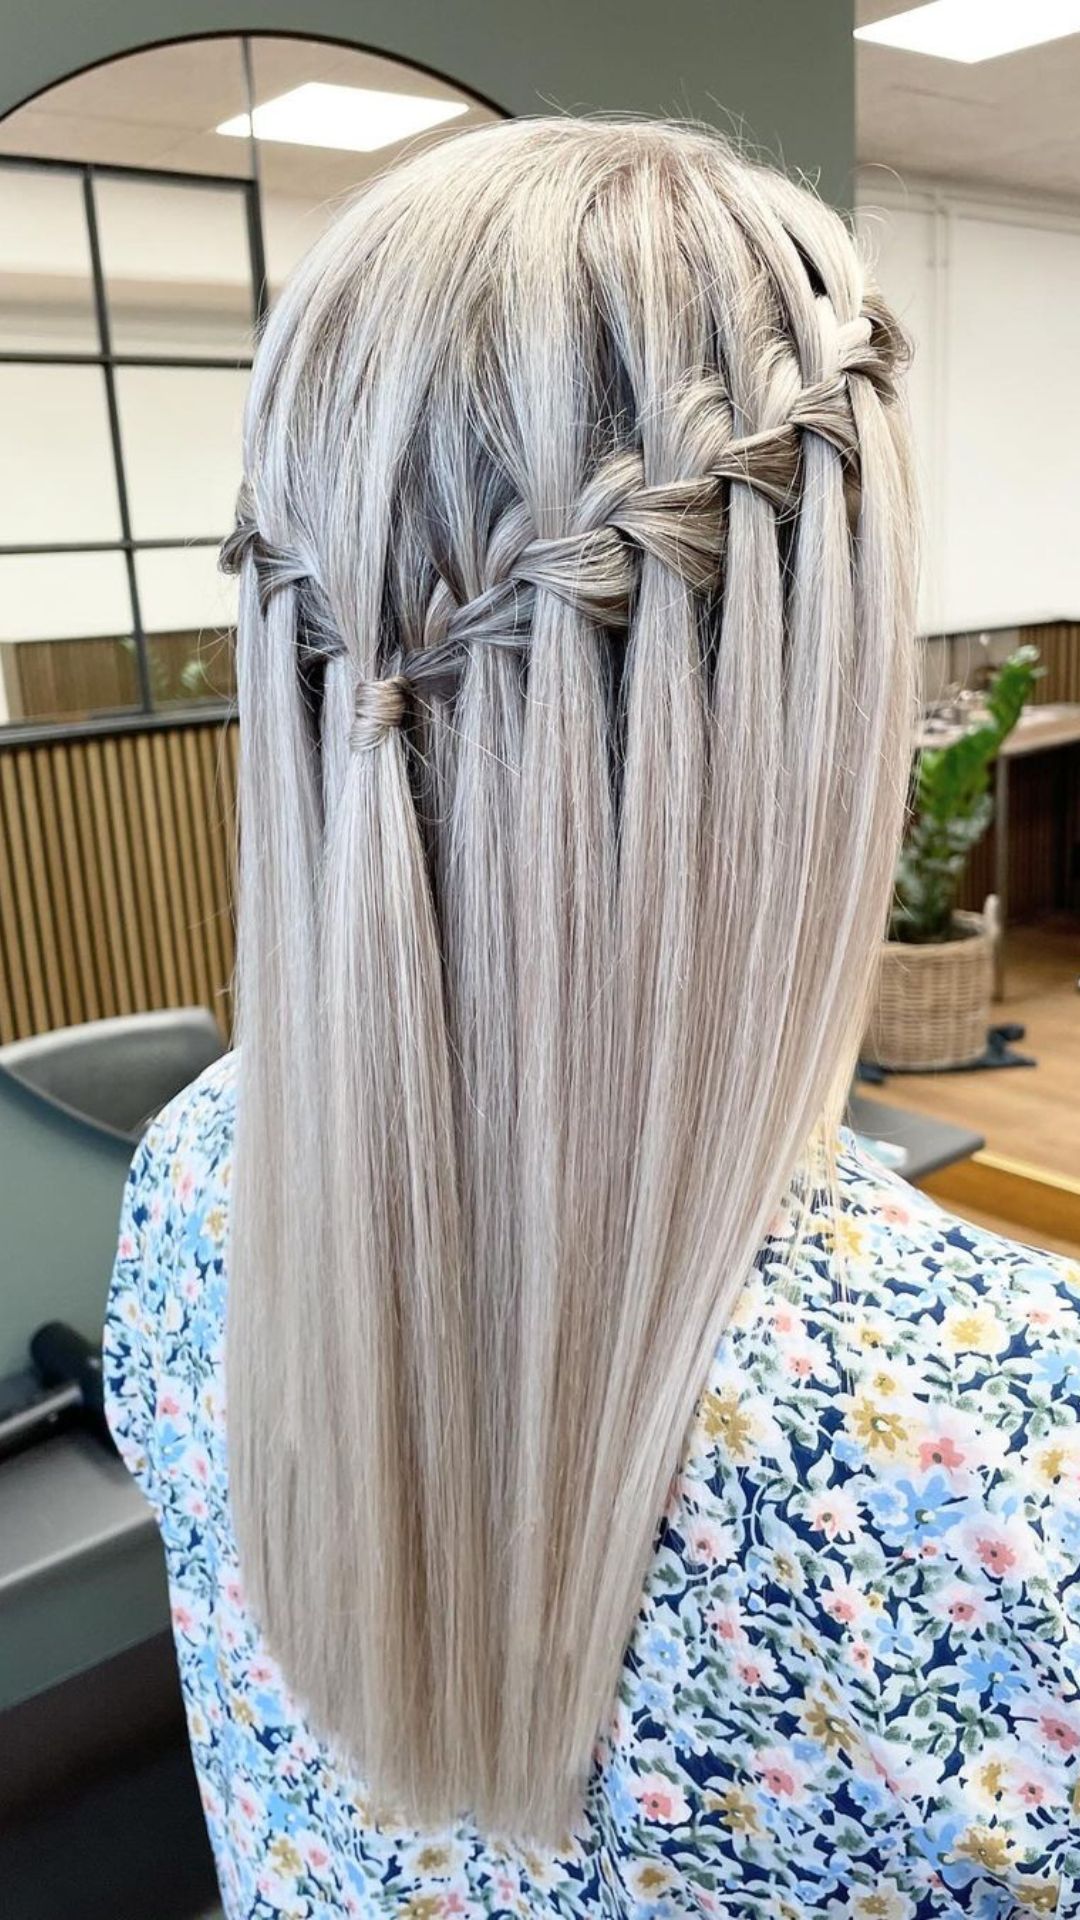 A woman with blonde waterfall braid.